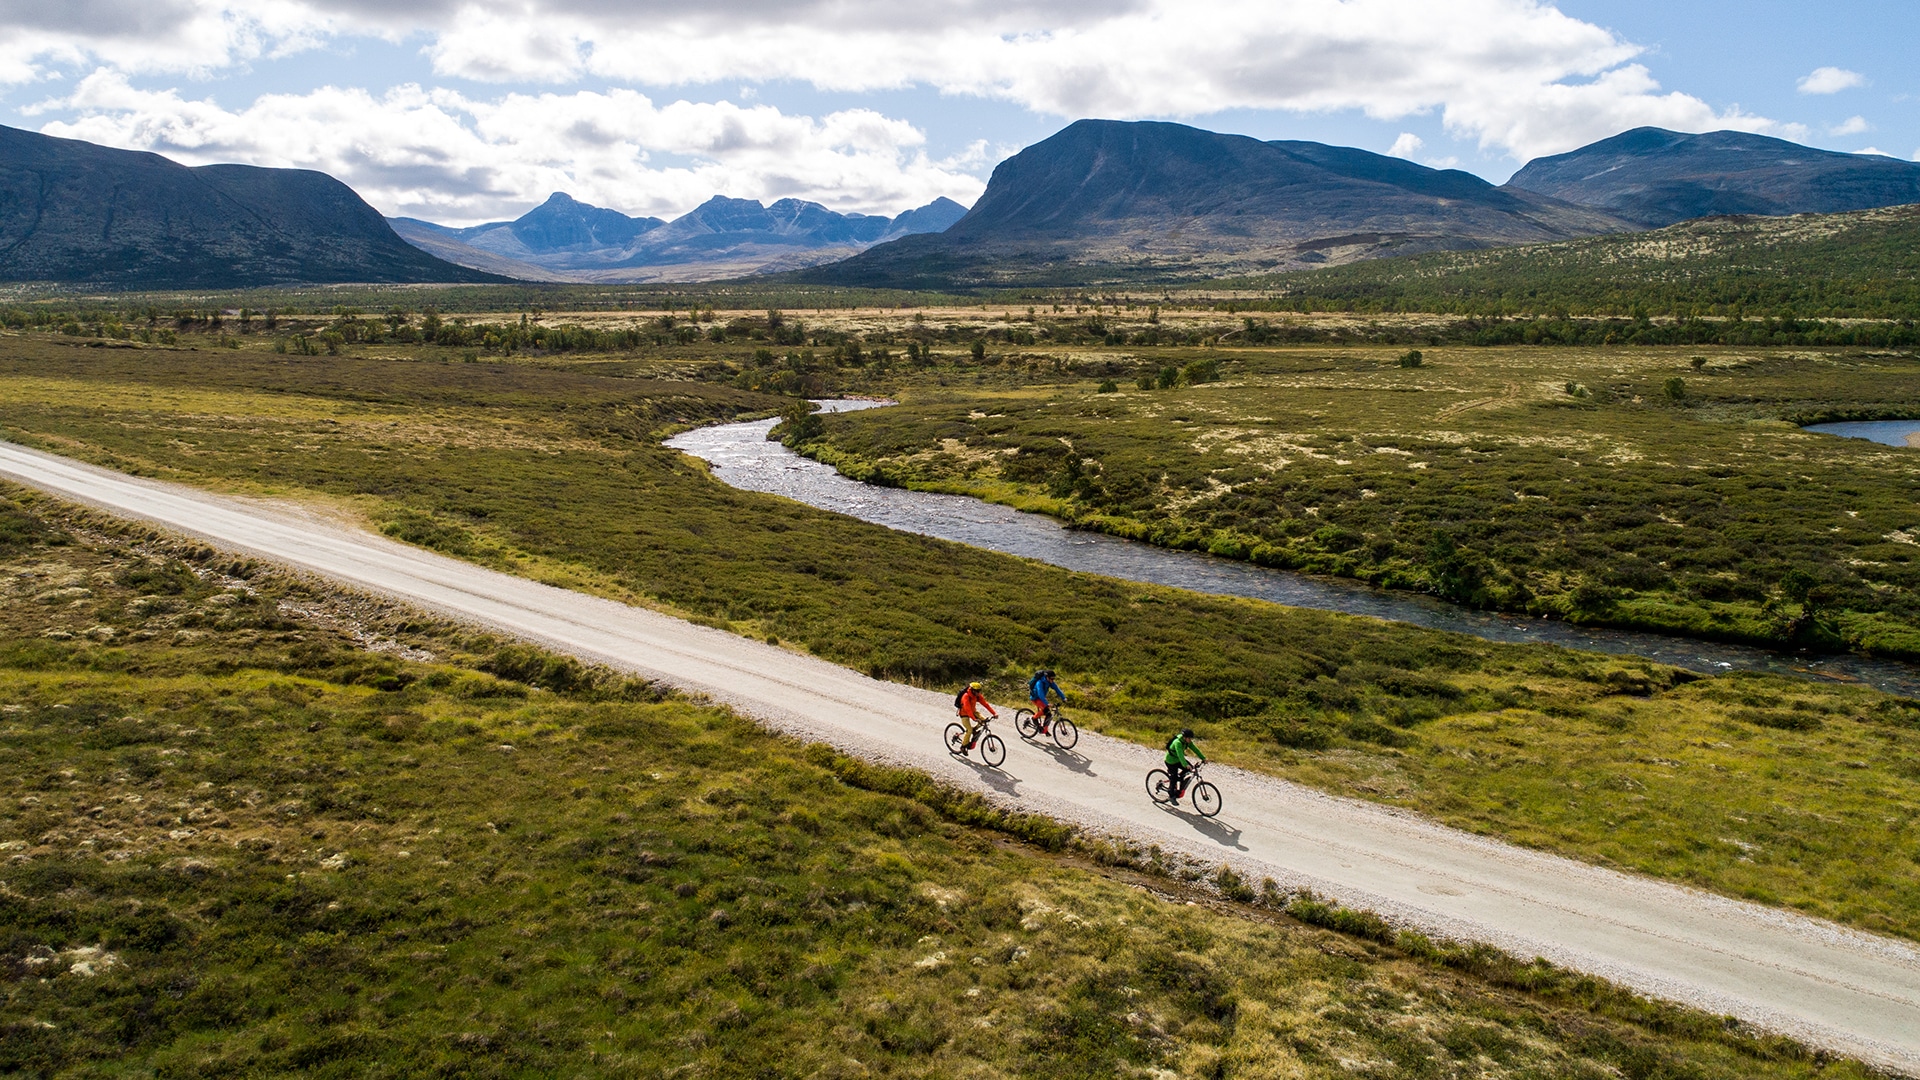 Three people riding bikes on a path in the mountain landscape of Grimsdalen.